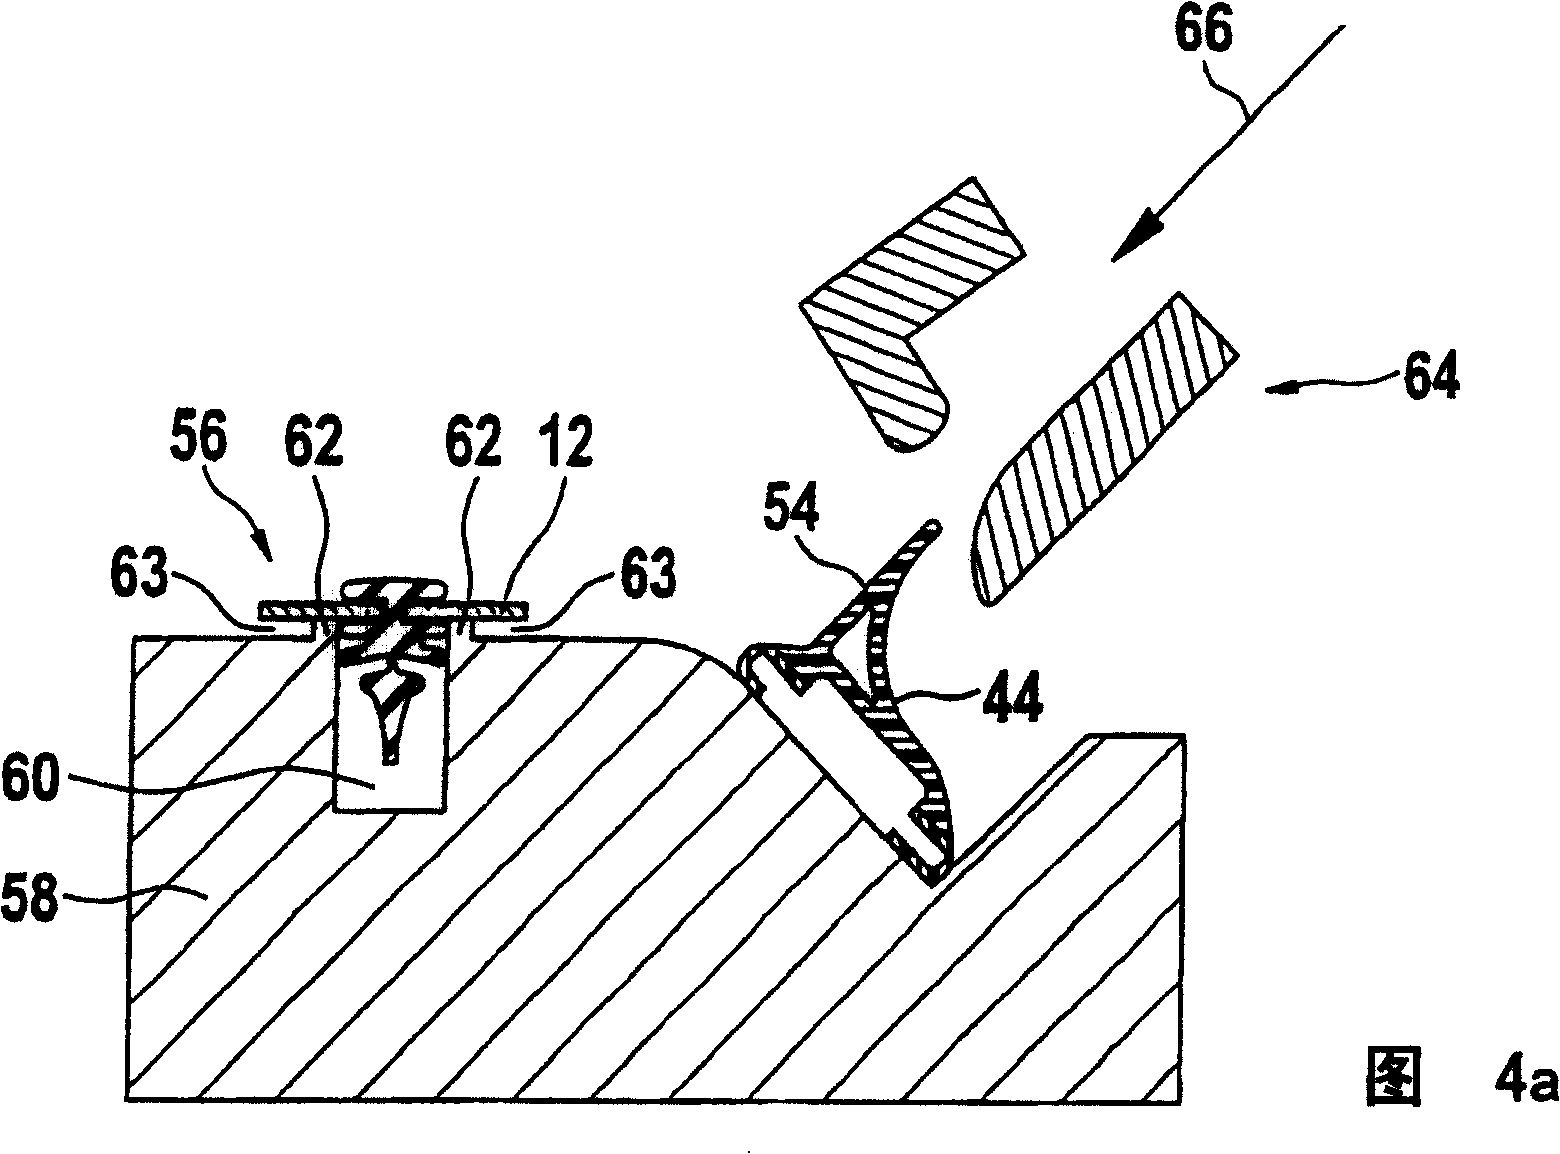 Method for producing a wiper blade, device for carrying out the method and wiper blade produced according to the method